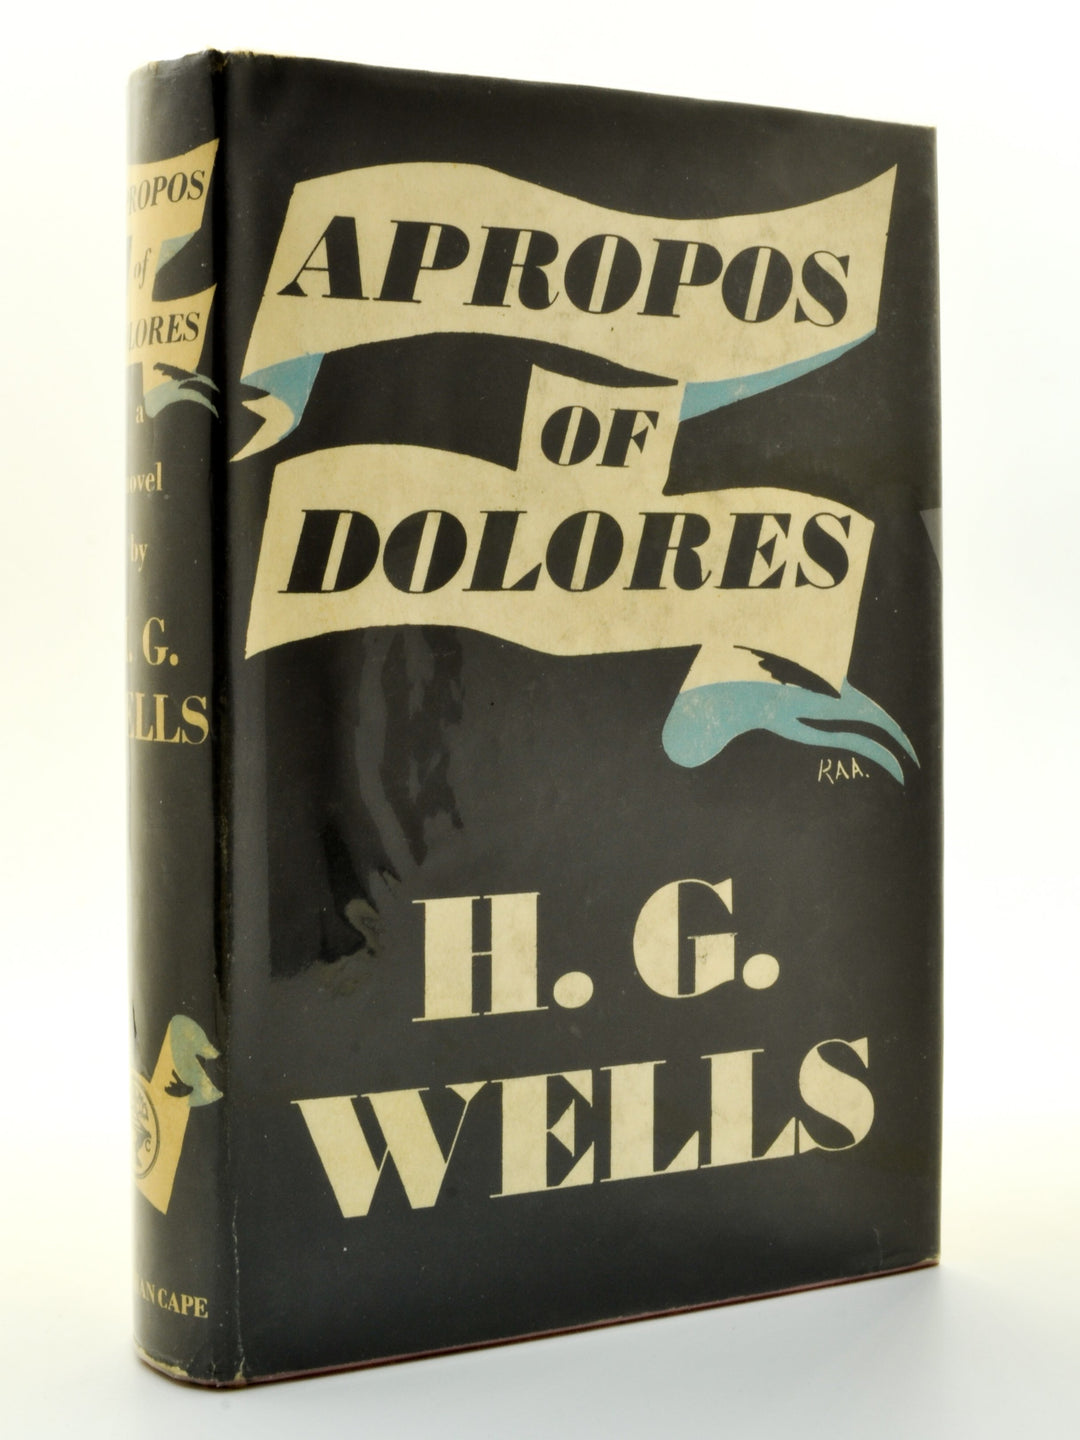 Wells, H G - Apropos of Dolores | back cover